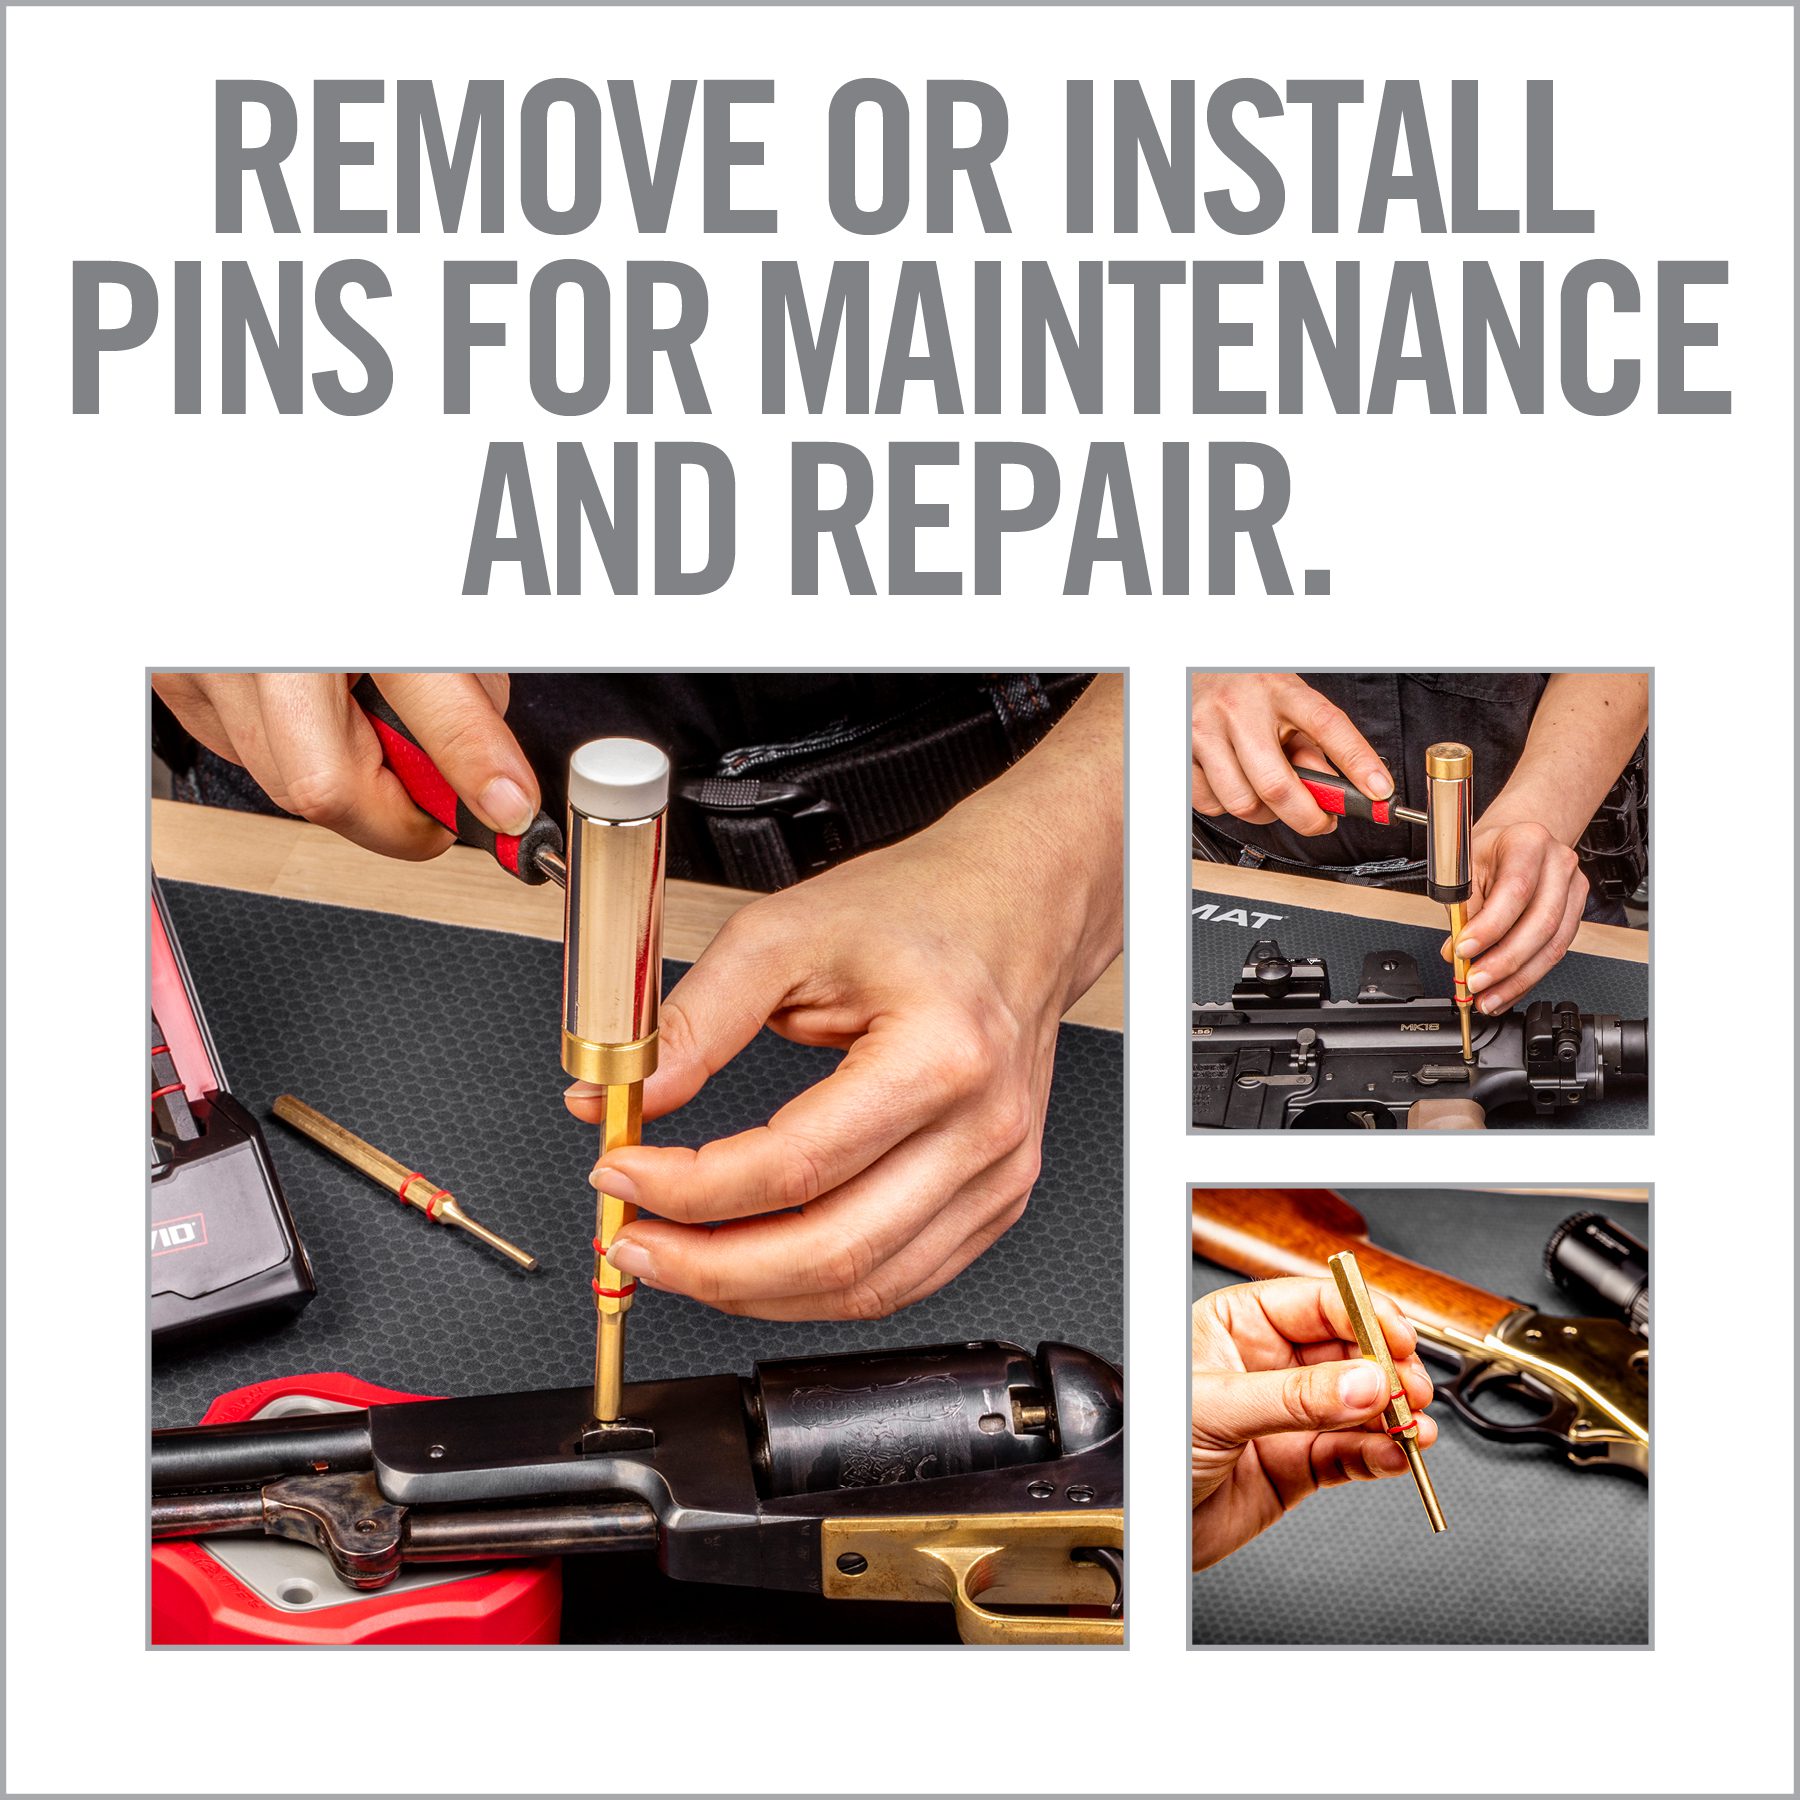 the instructions for how to remove or install pins for maintenance and repair